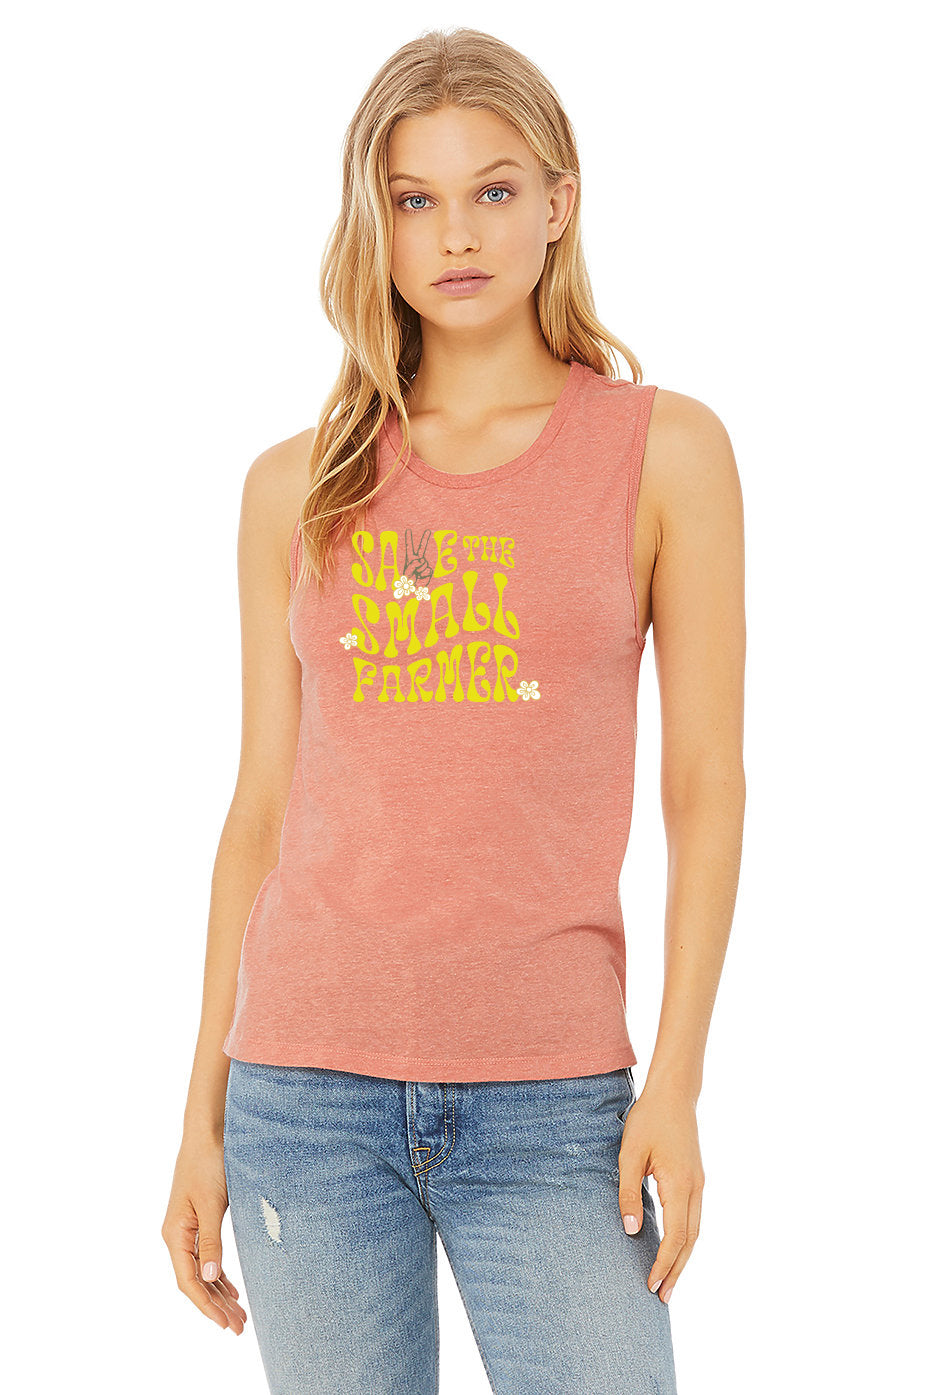 WWF "Save the small farmer" | Women's Muscle Tank | Heather Sunset